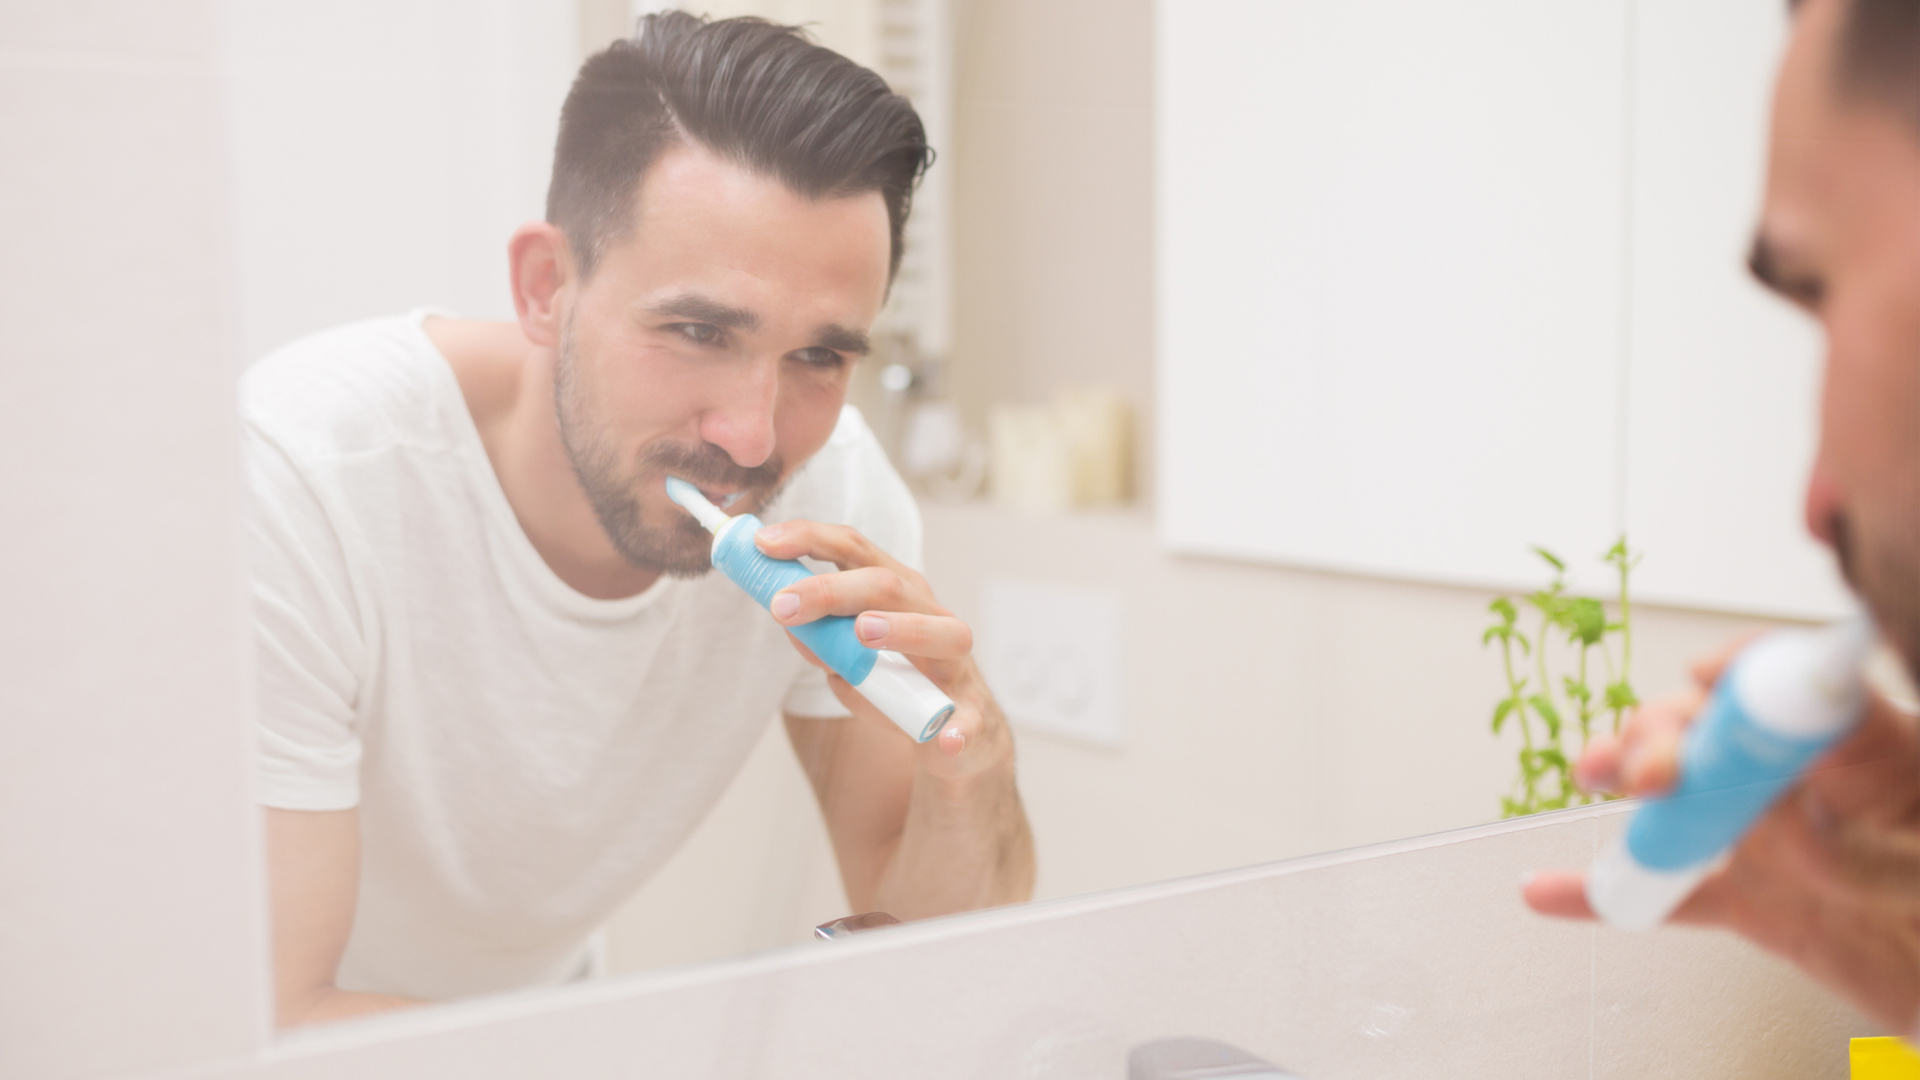 image shows a man brushing his teeth in the mirror